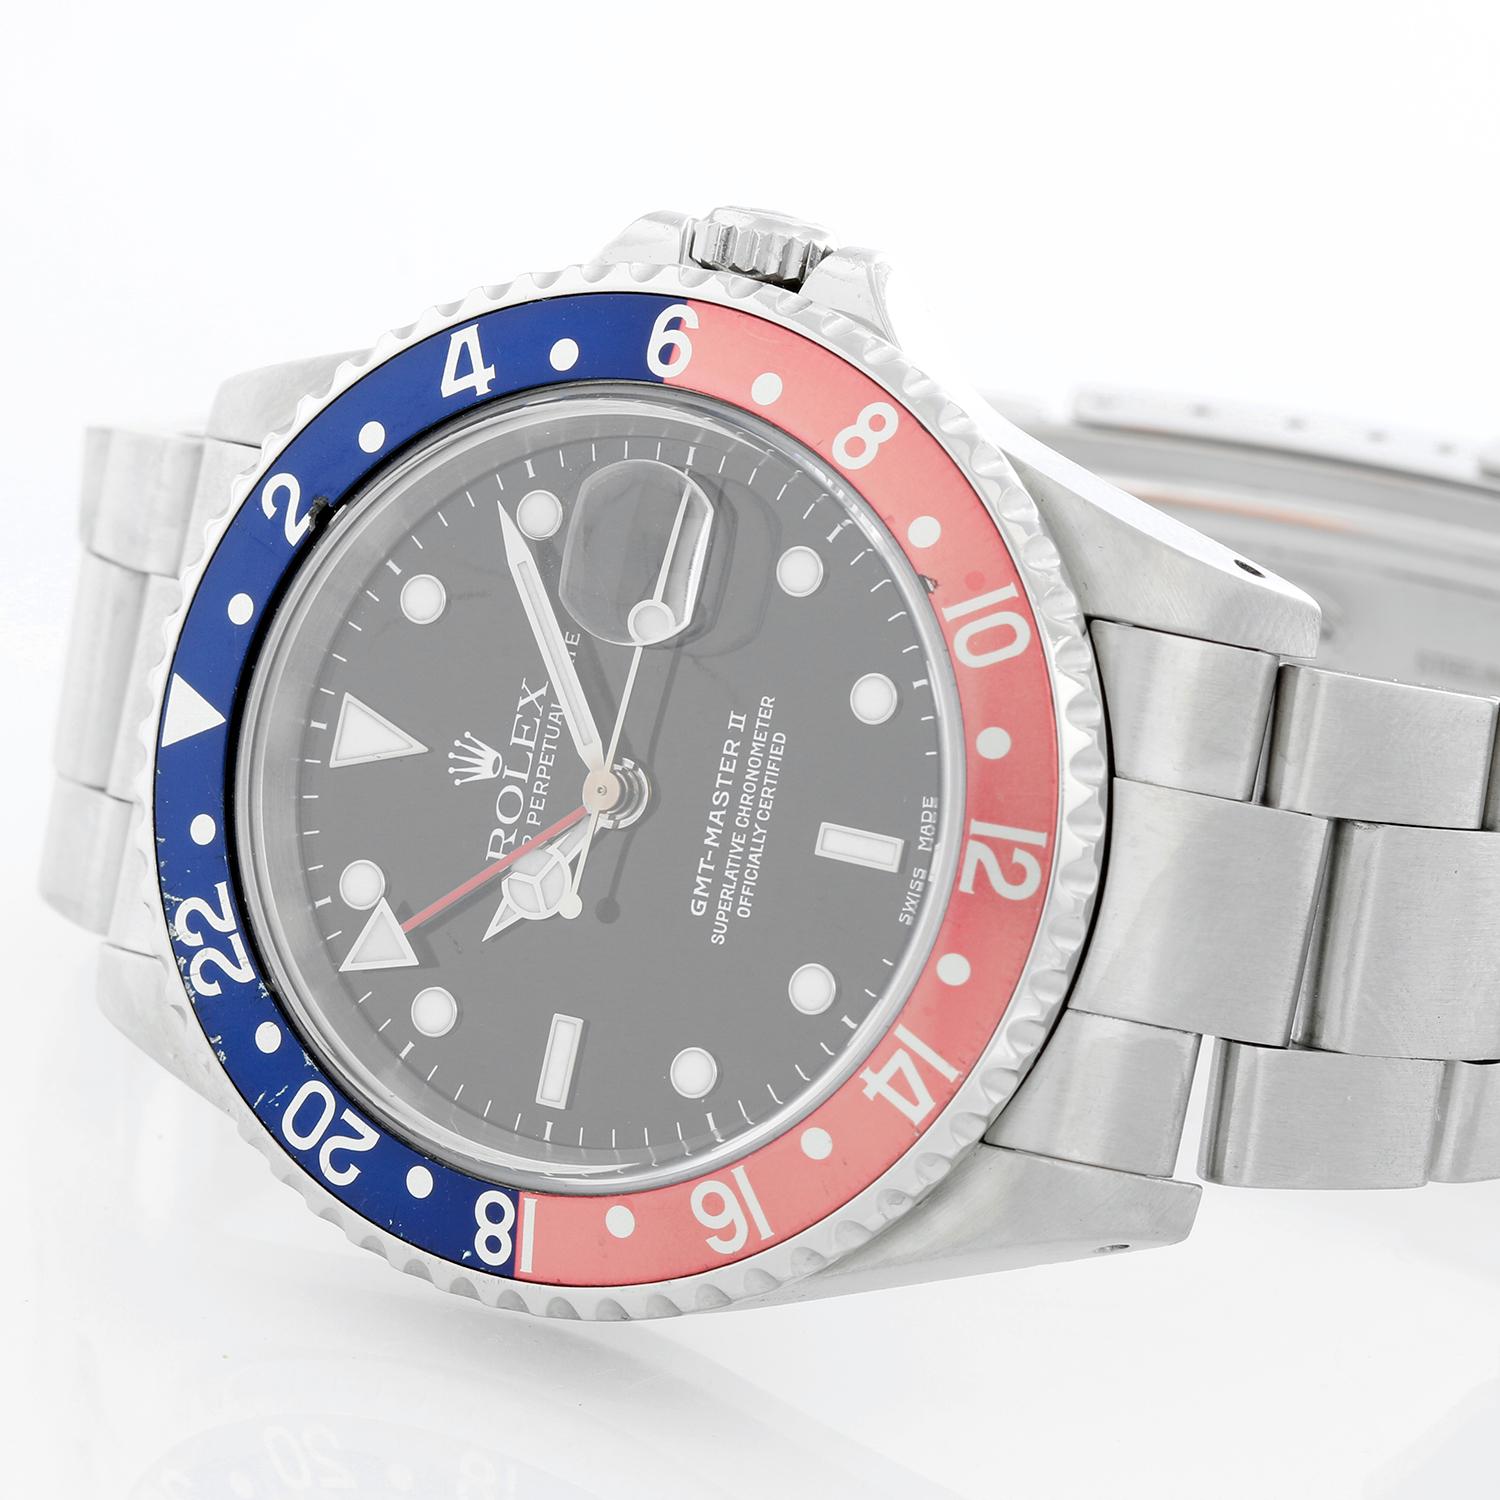 Men's Rolex GMT-Master II Watch 16710 - Automatic winding, 31 jewels, Quickset, sapphire crystal. Stainless steel case; rotating bezel with black/red bezel (40mm diameter). Black dial with luminous style markers. Stainless steel Oyster bracelet.